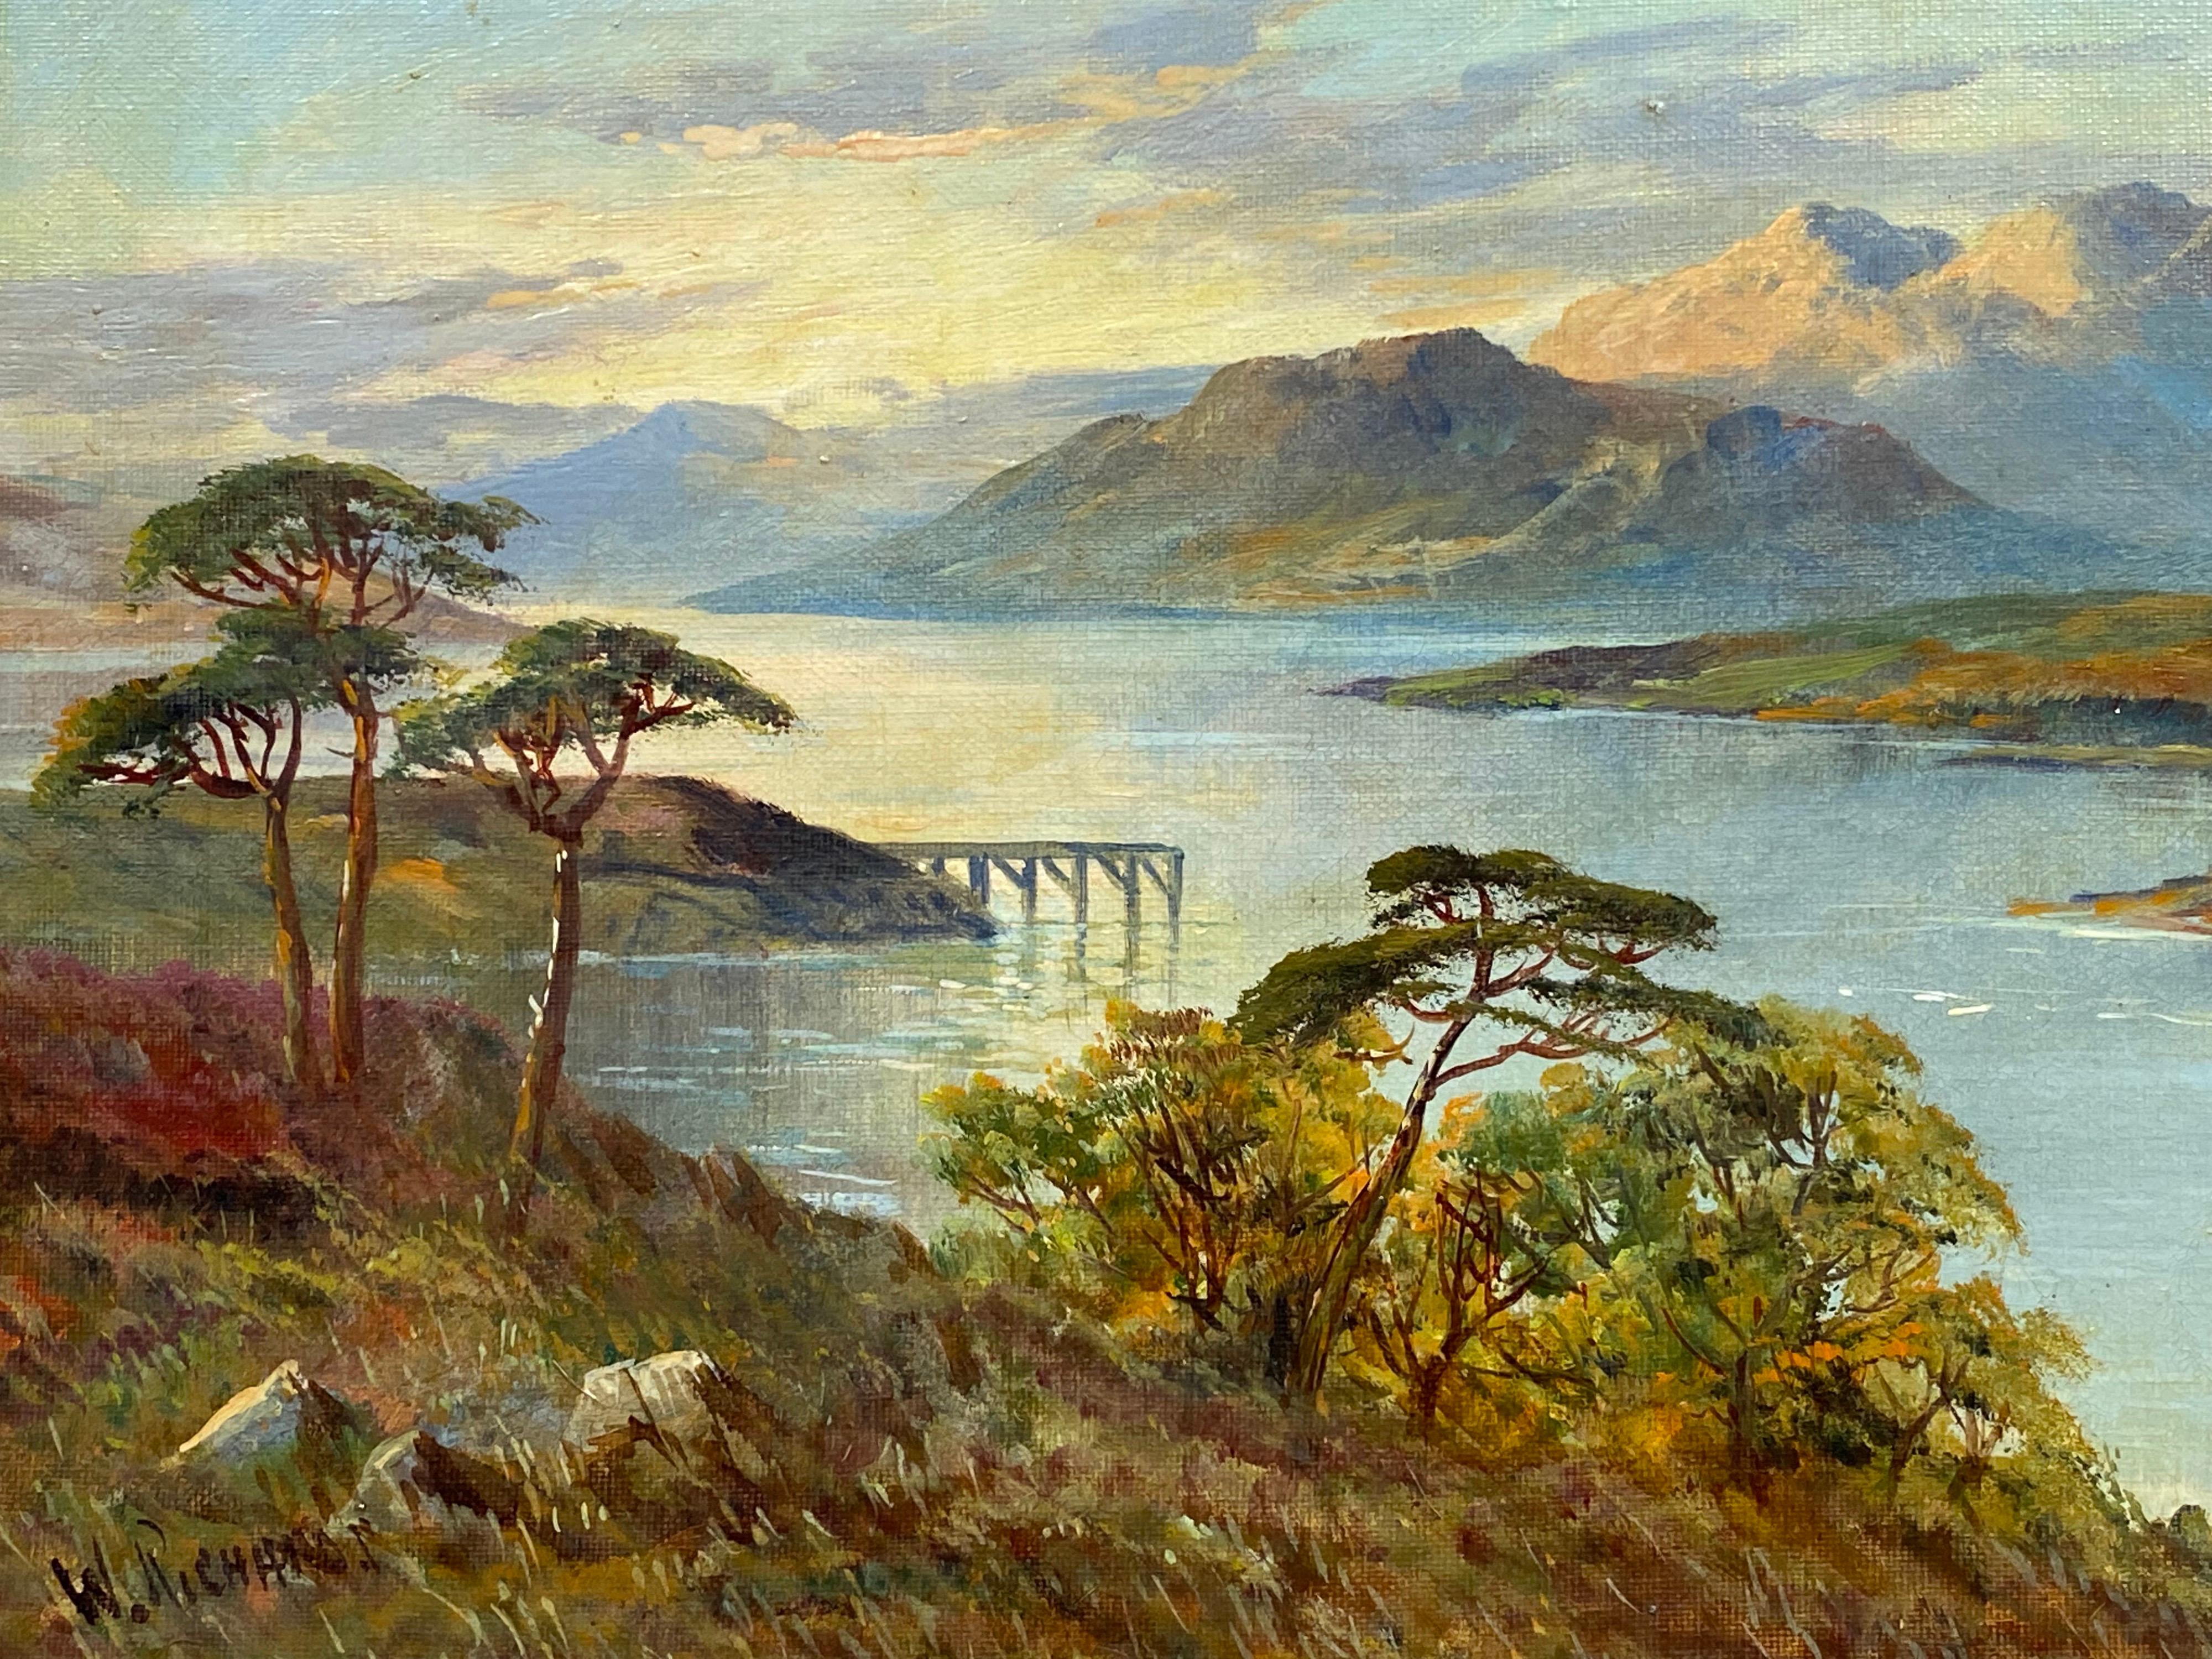 Luss Loch Lomond, Antique Scottish Highlands Oil Painting Fading Light Scotland - Gray Figurative Painting by Francis E. Jamieson